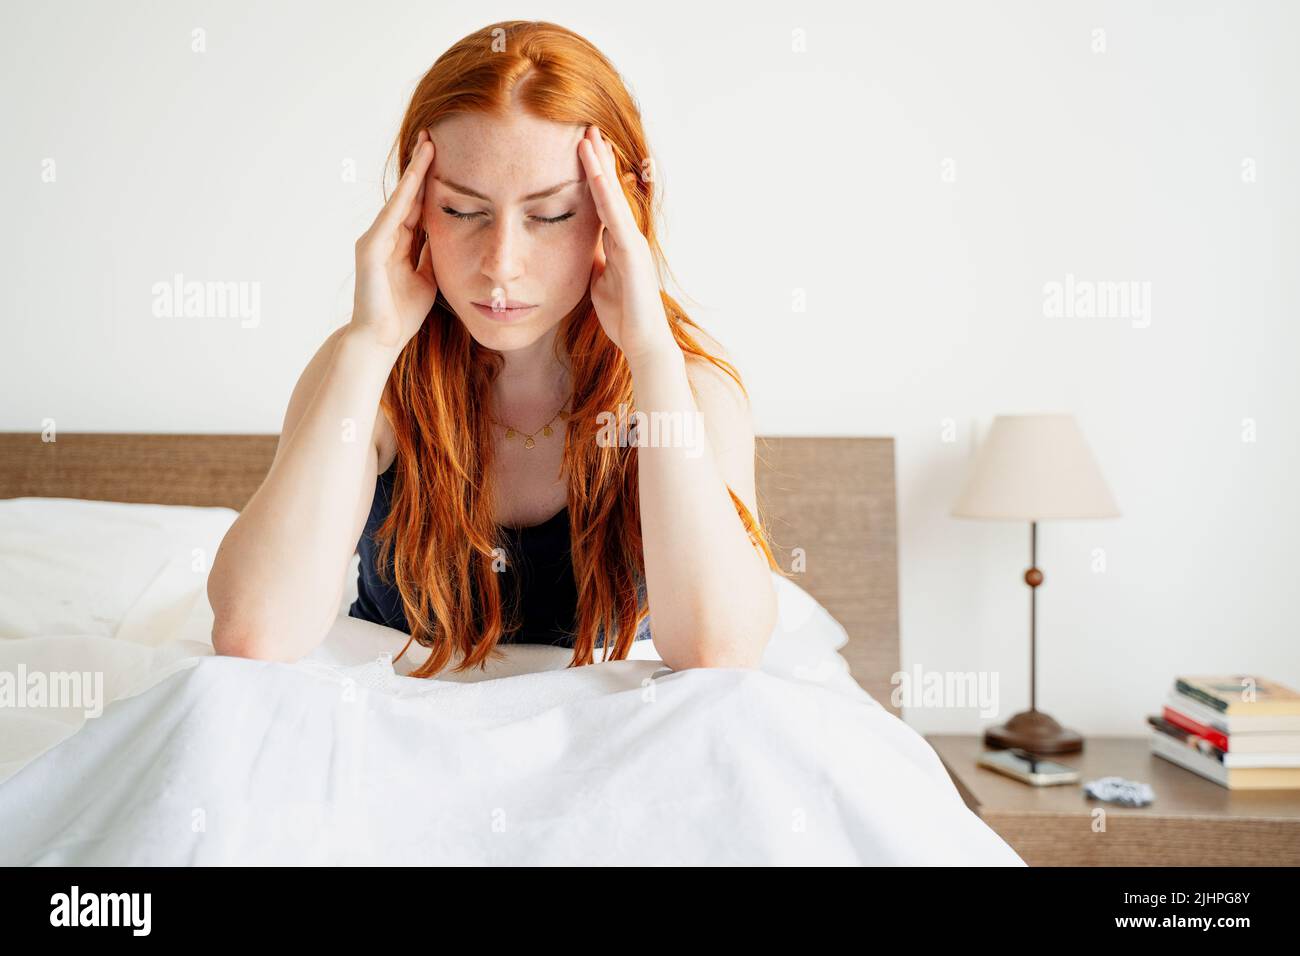 Tired woman lying awake in bed suffer from insomnia headache Stock Photo